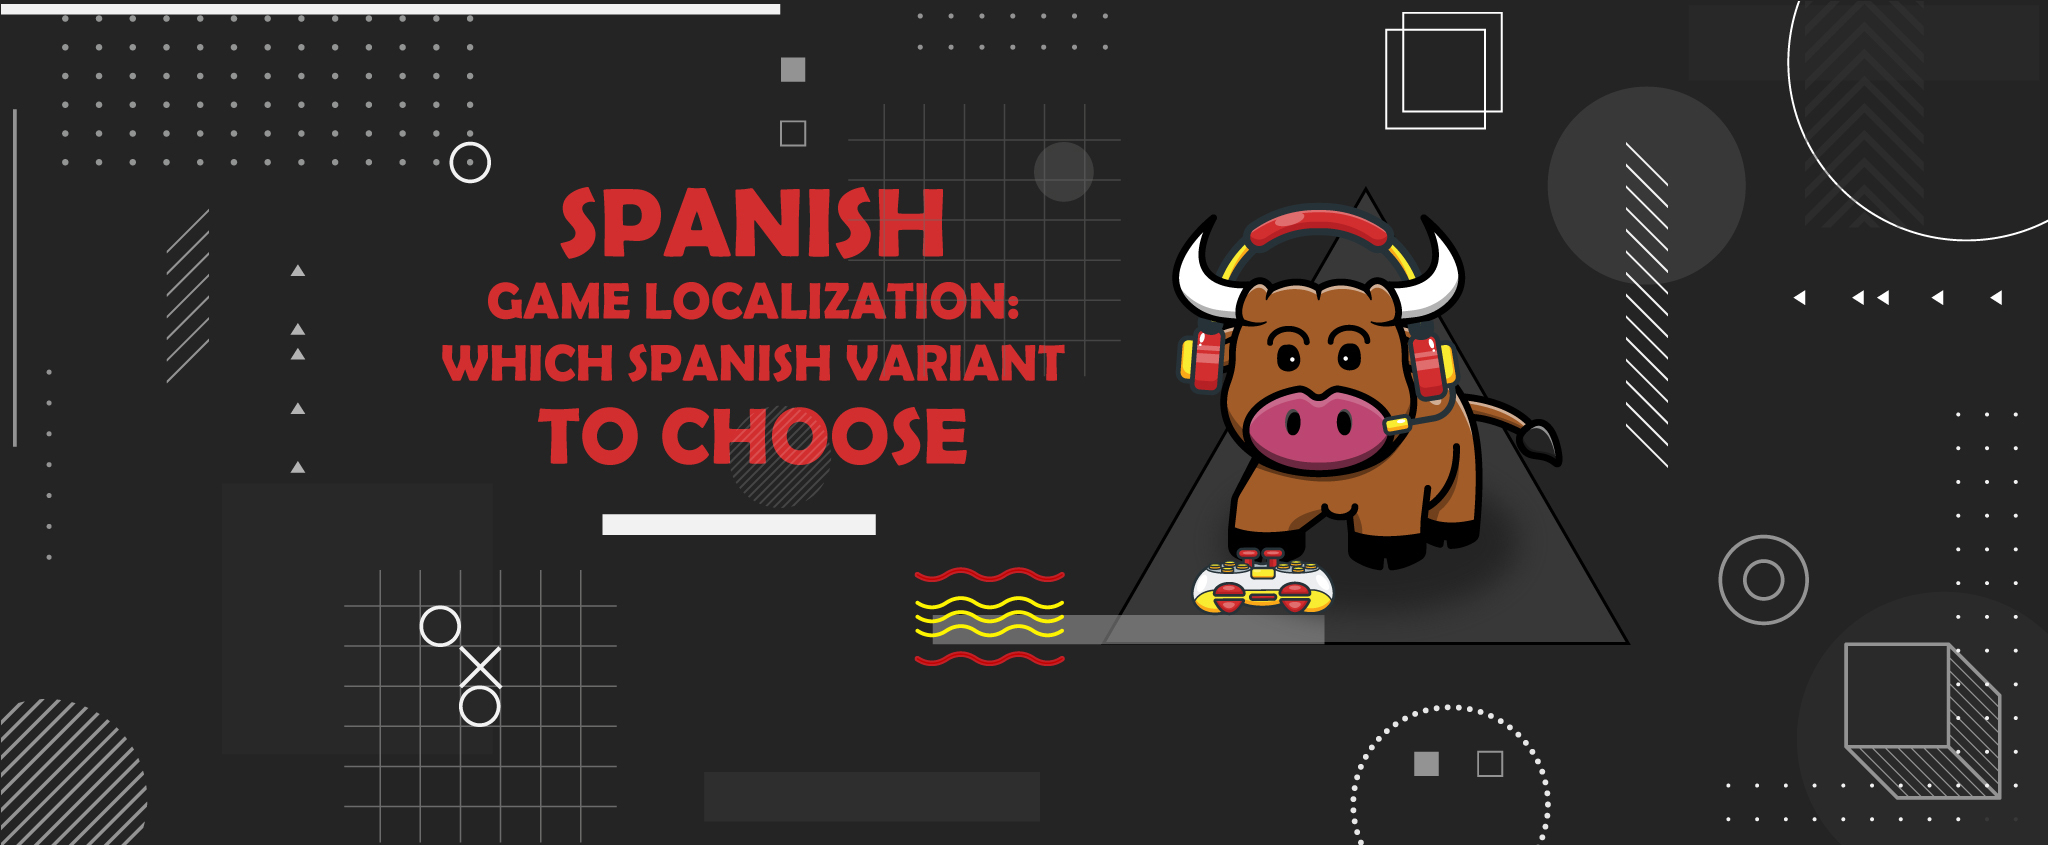 Spanish Game Localization; Which Spanish Variant to Choose